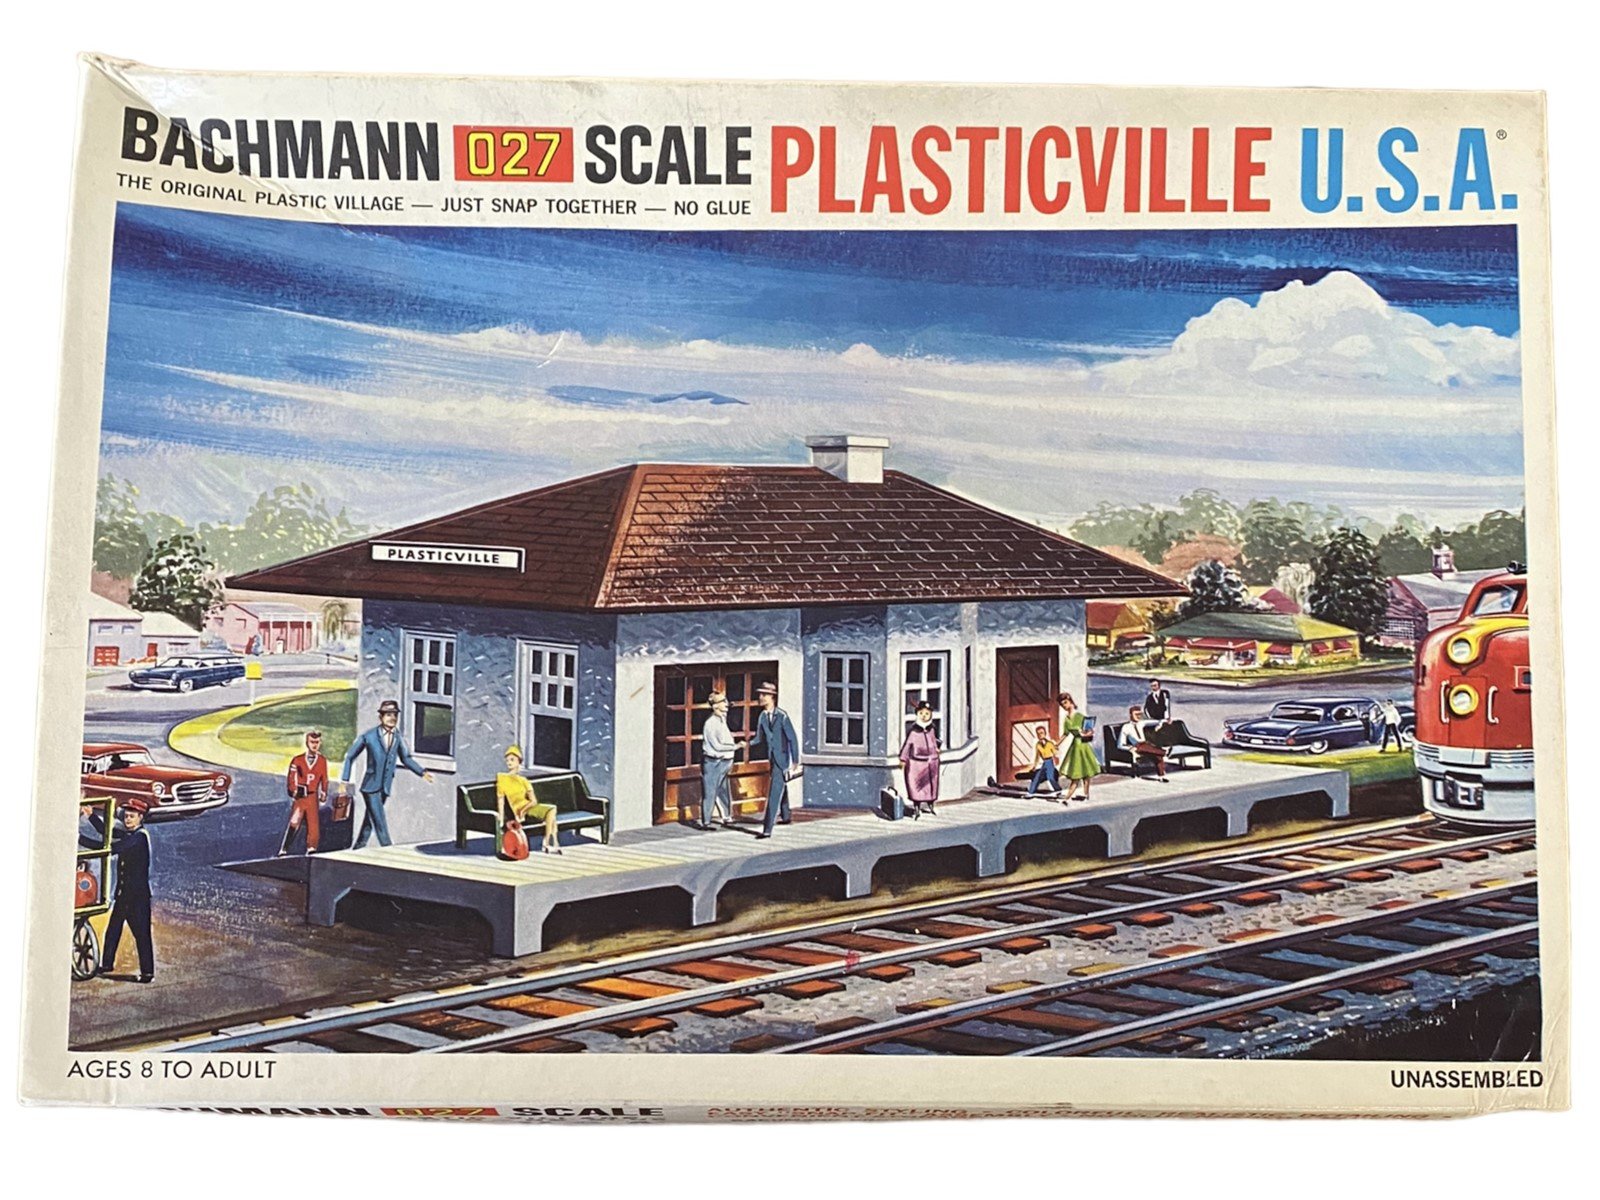 Bachmann Lionel 027 Scale Plasticville U.S.A Ranch House and Suburban Station